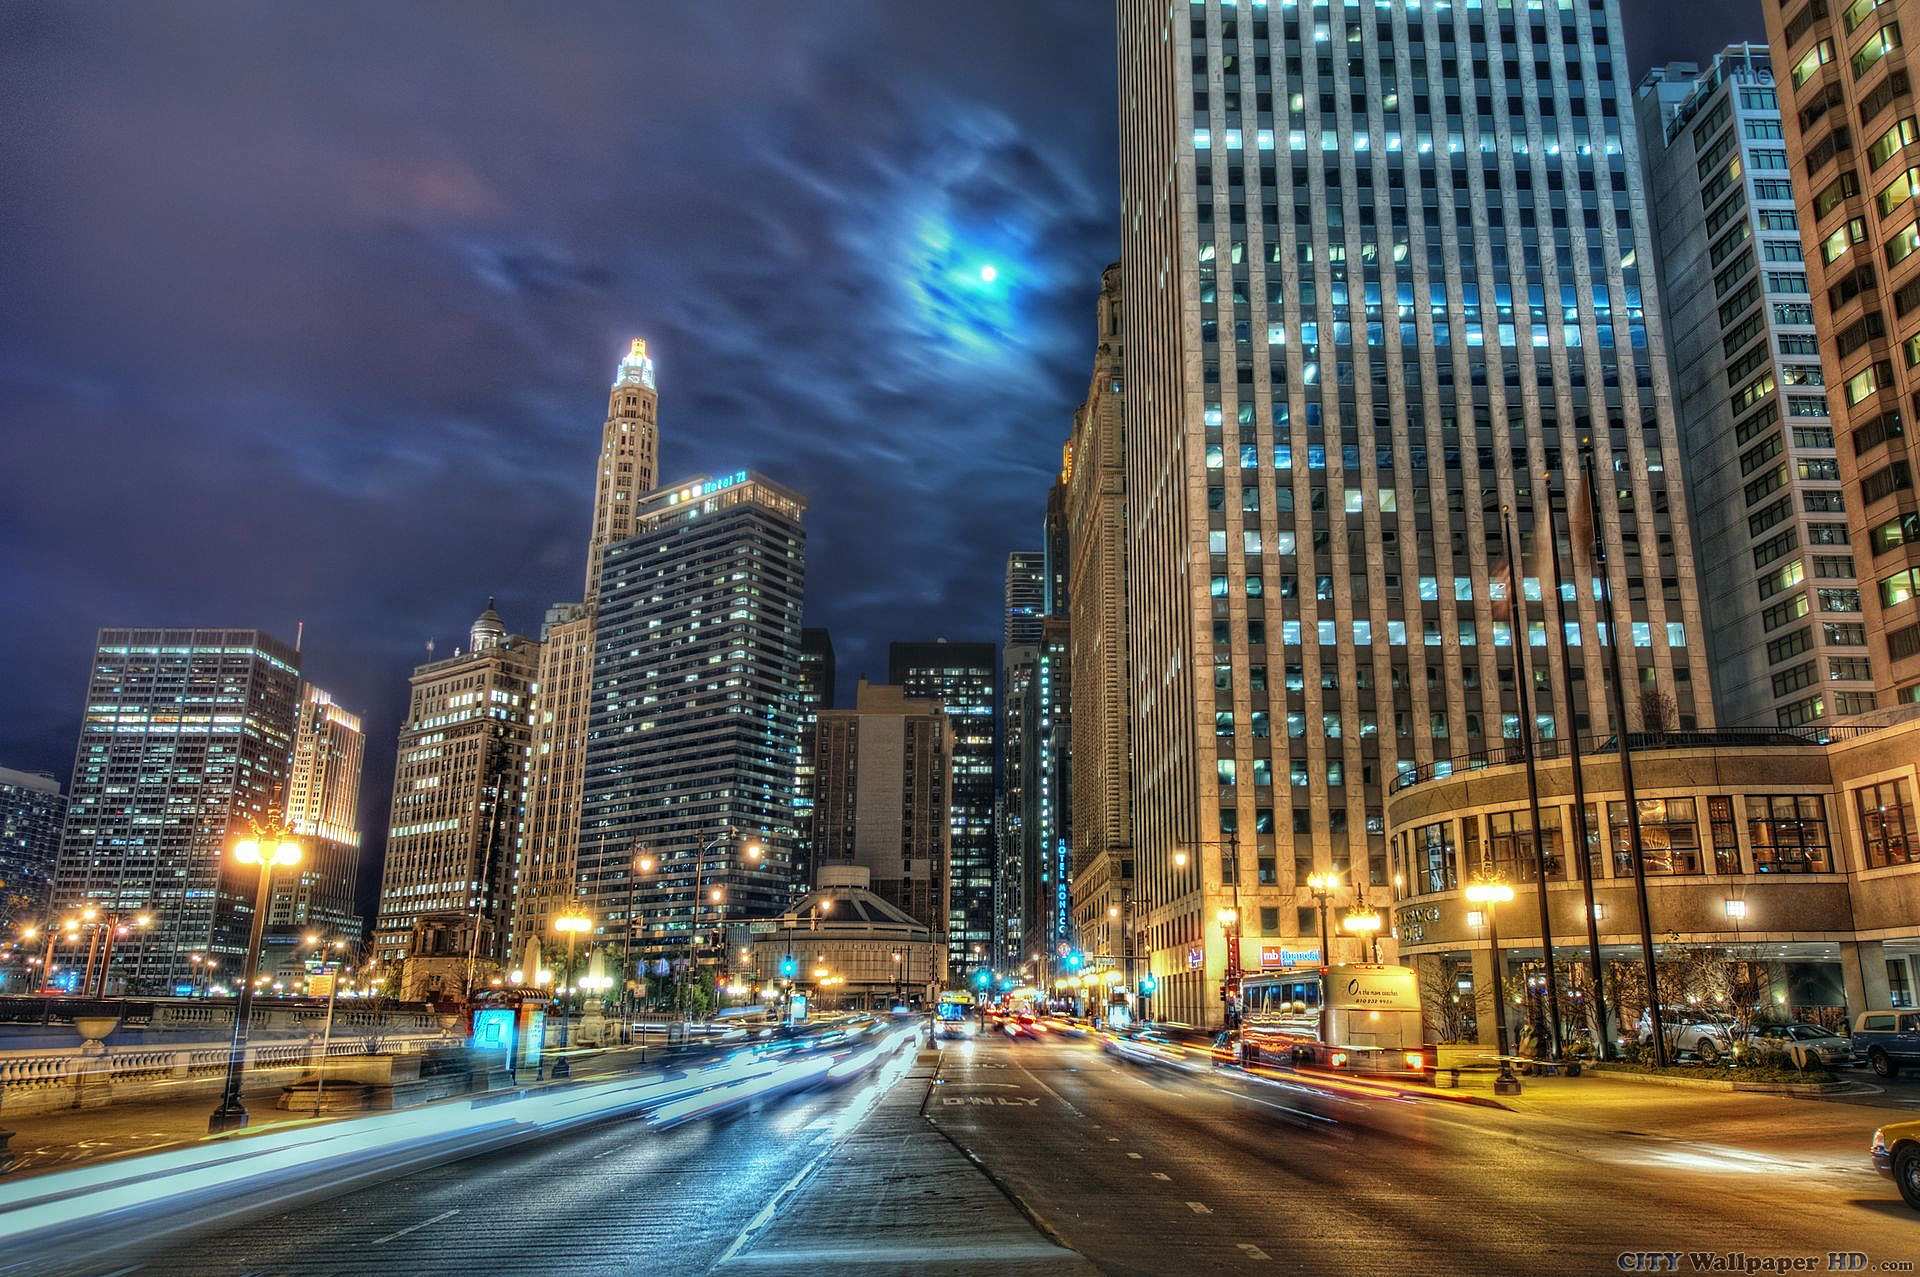 Full Moon In Chicago - Chill Out Smooth Jazz - HD Wallpaper 